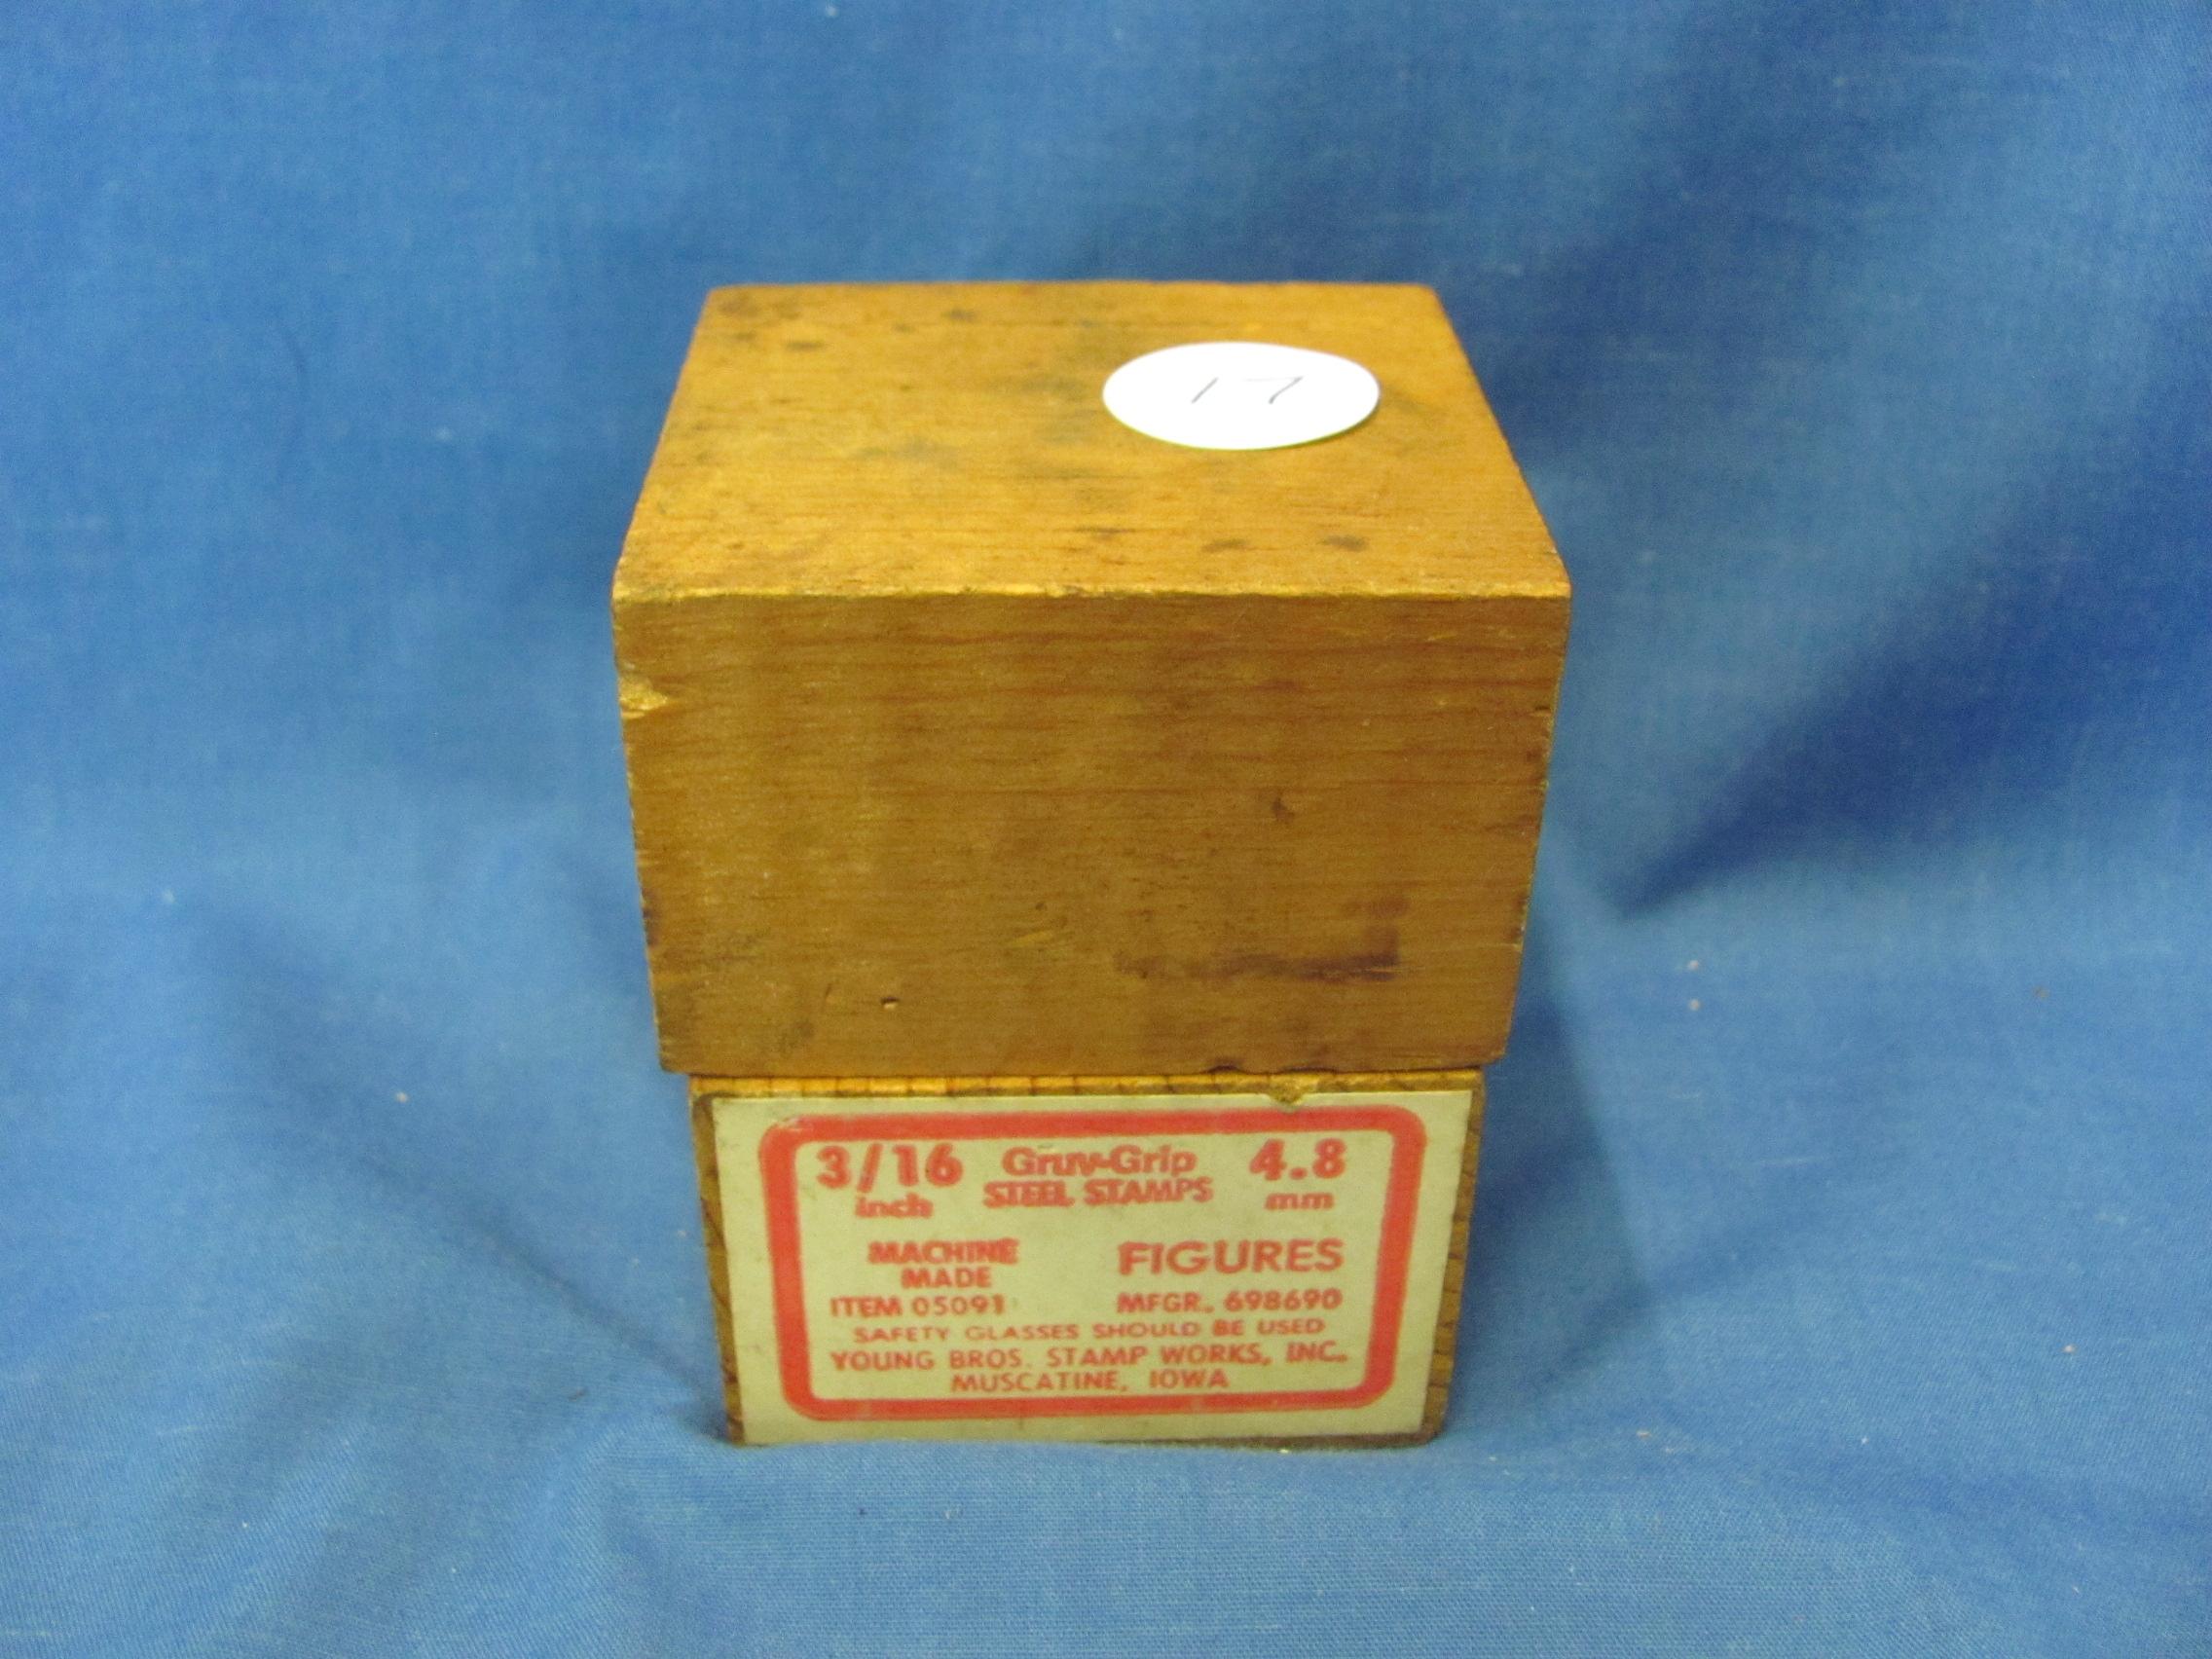 Gruv-Grip 3/16 Steel Stamps With Wood Box – Machine Made – #0-8